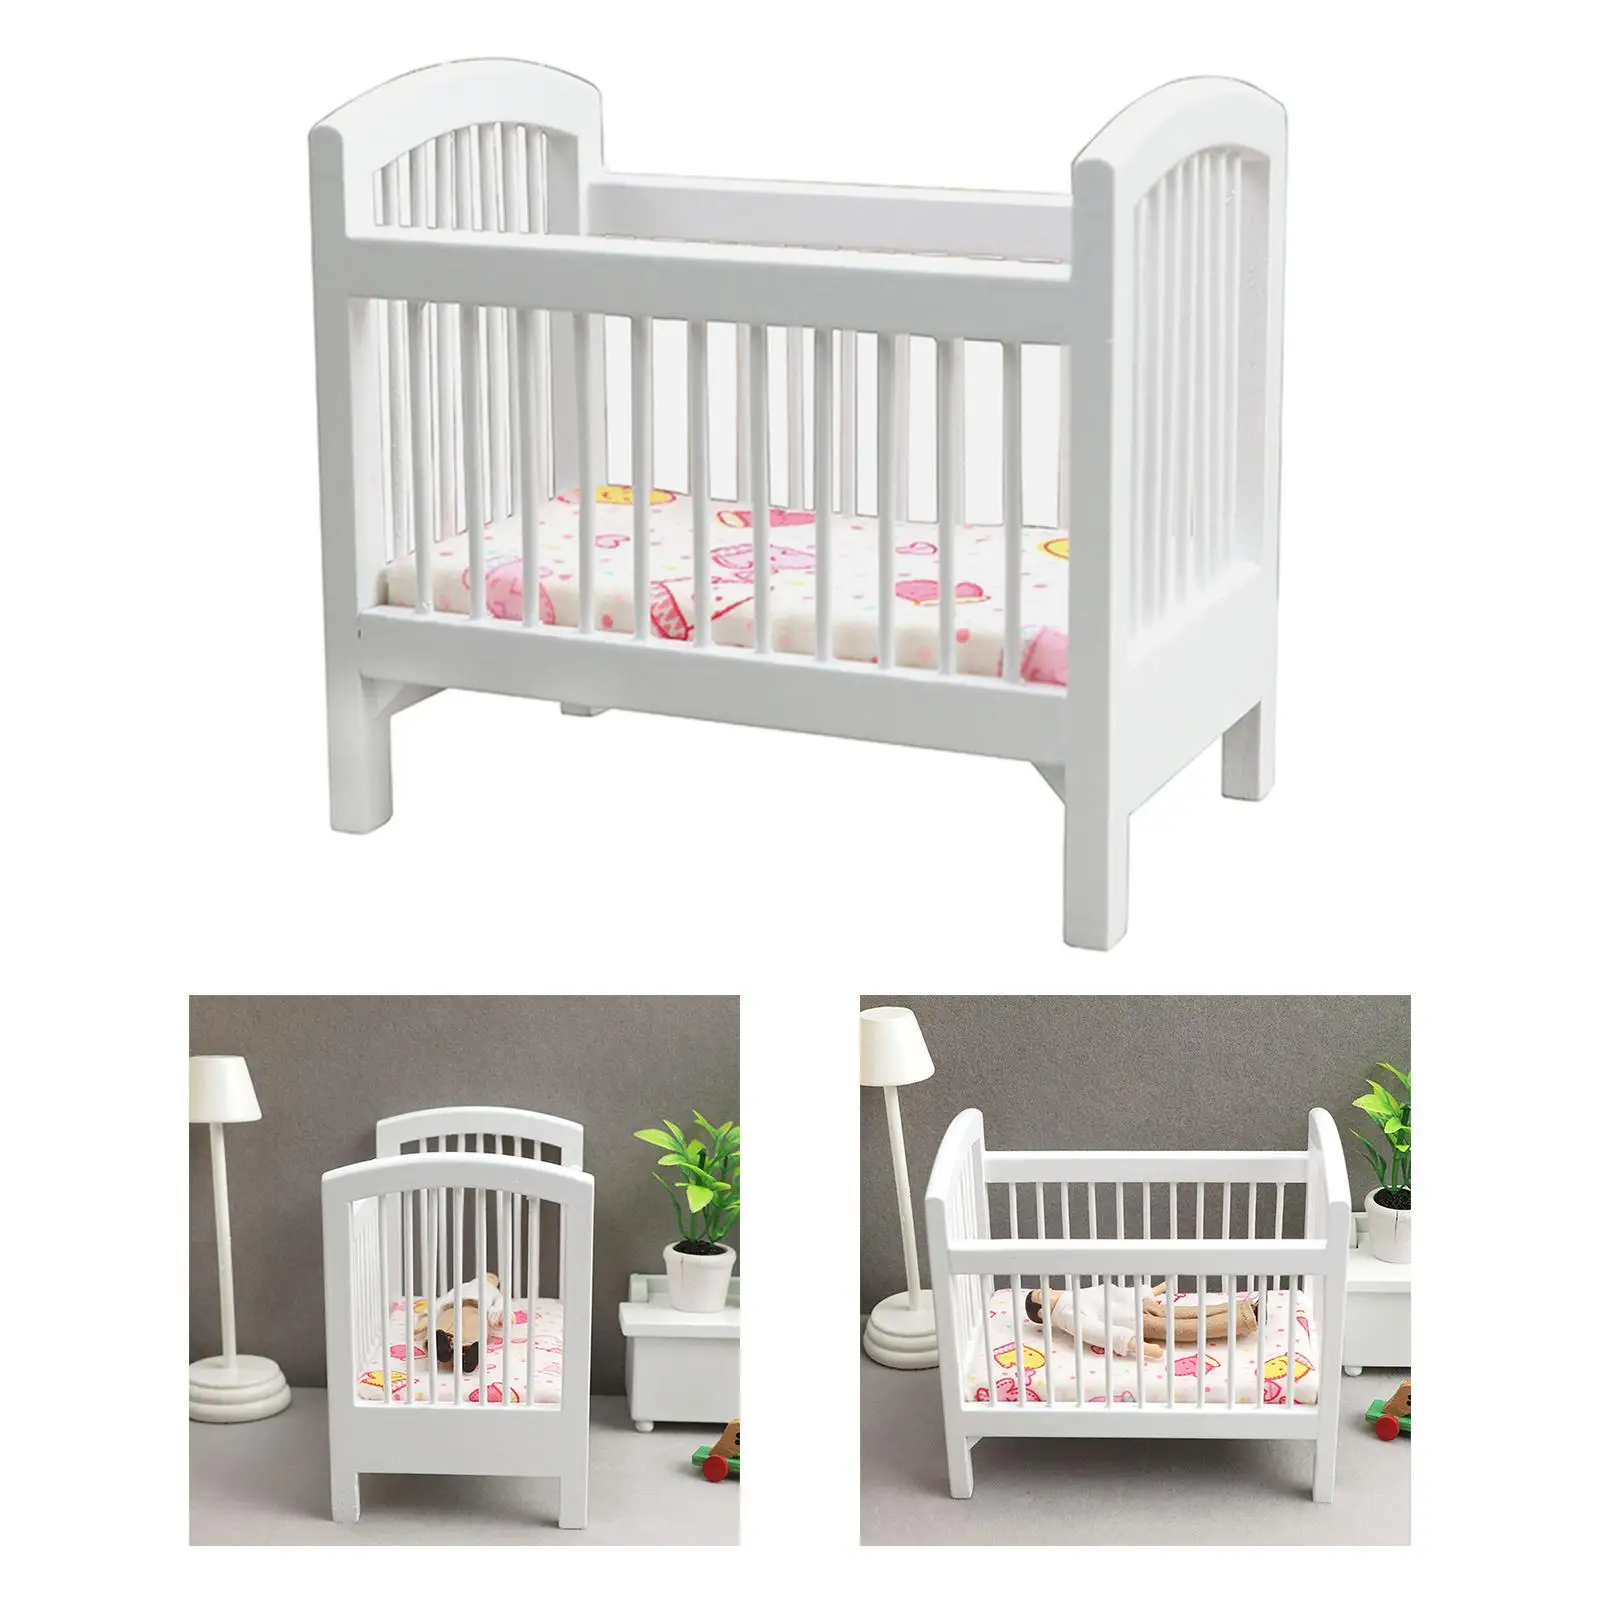 1/12 Scale Dollhouse Wooden Crib Baby Doll Cradle Simulation Furniture with